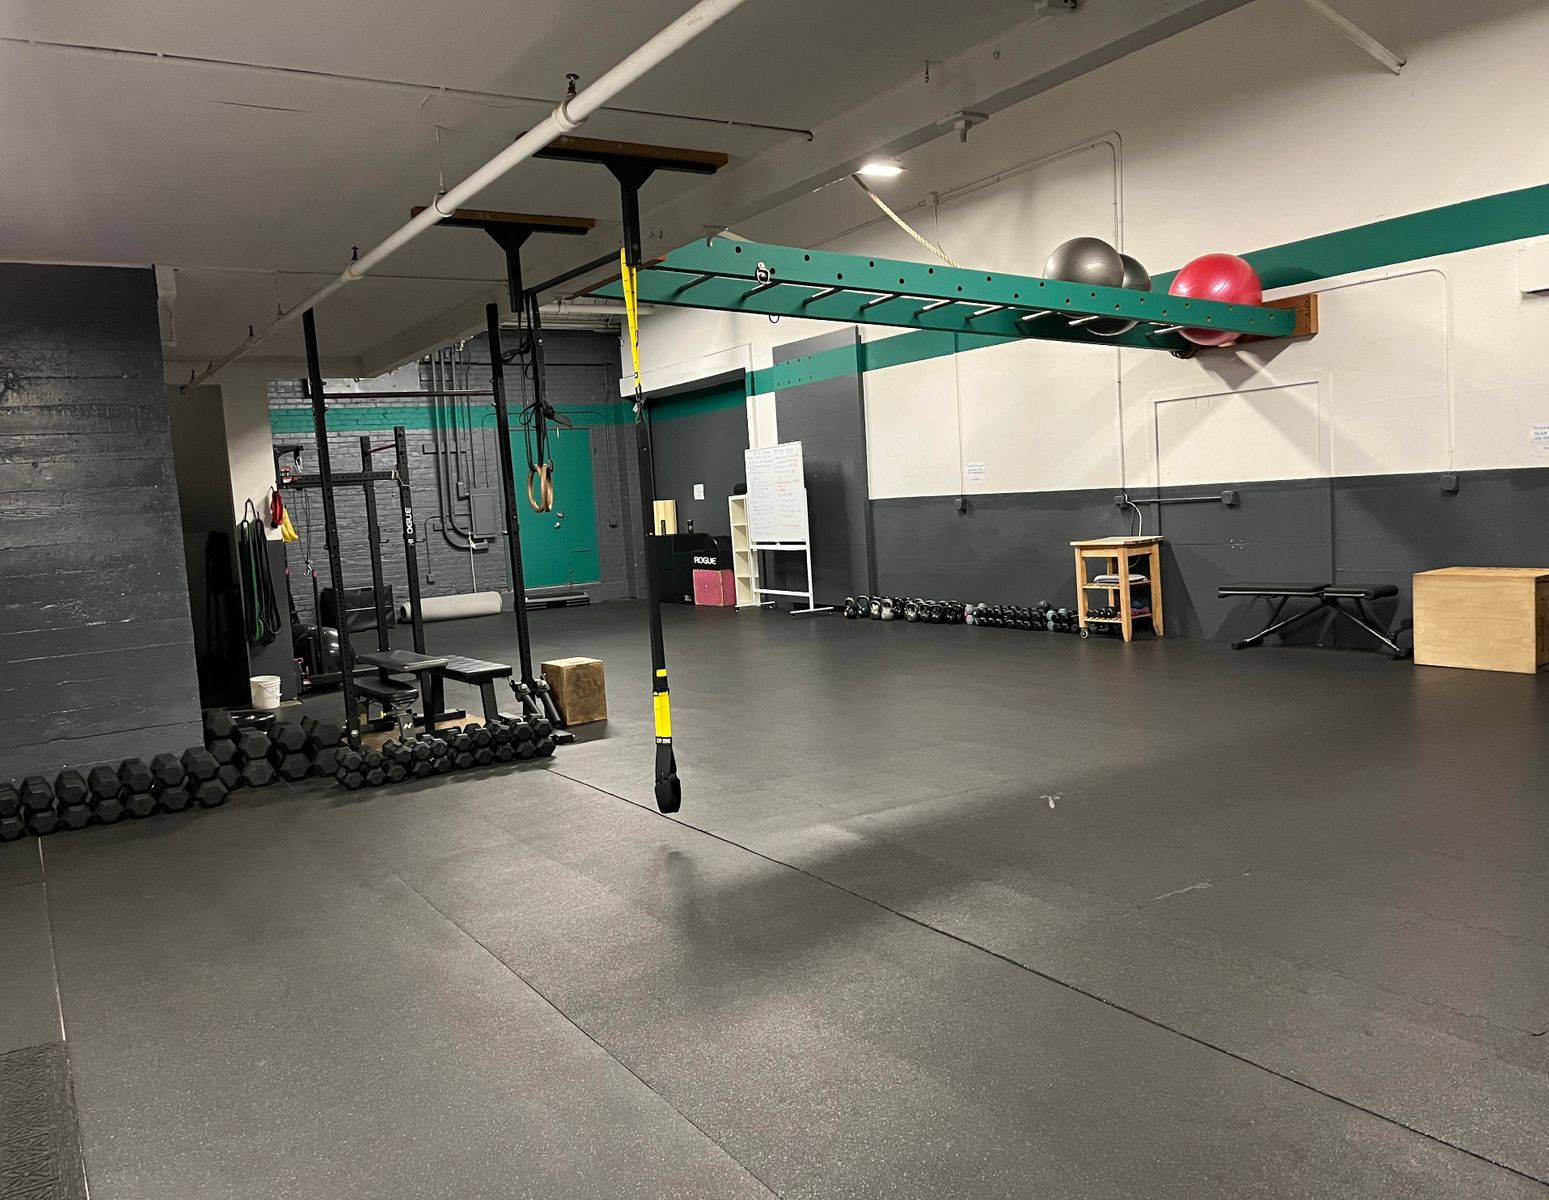 Photo of the gym space